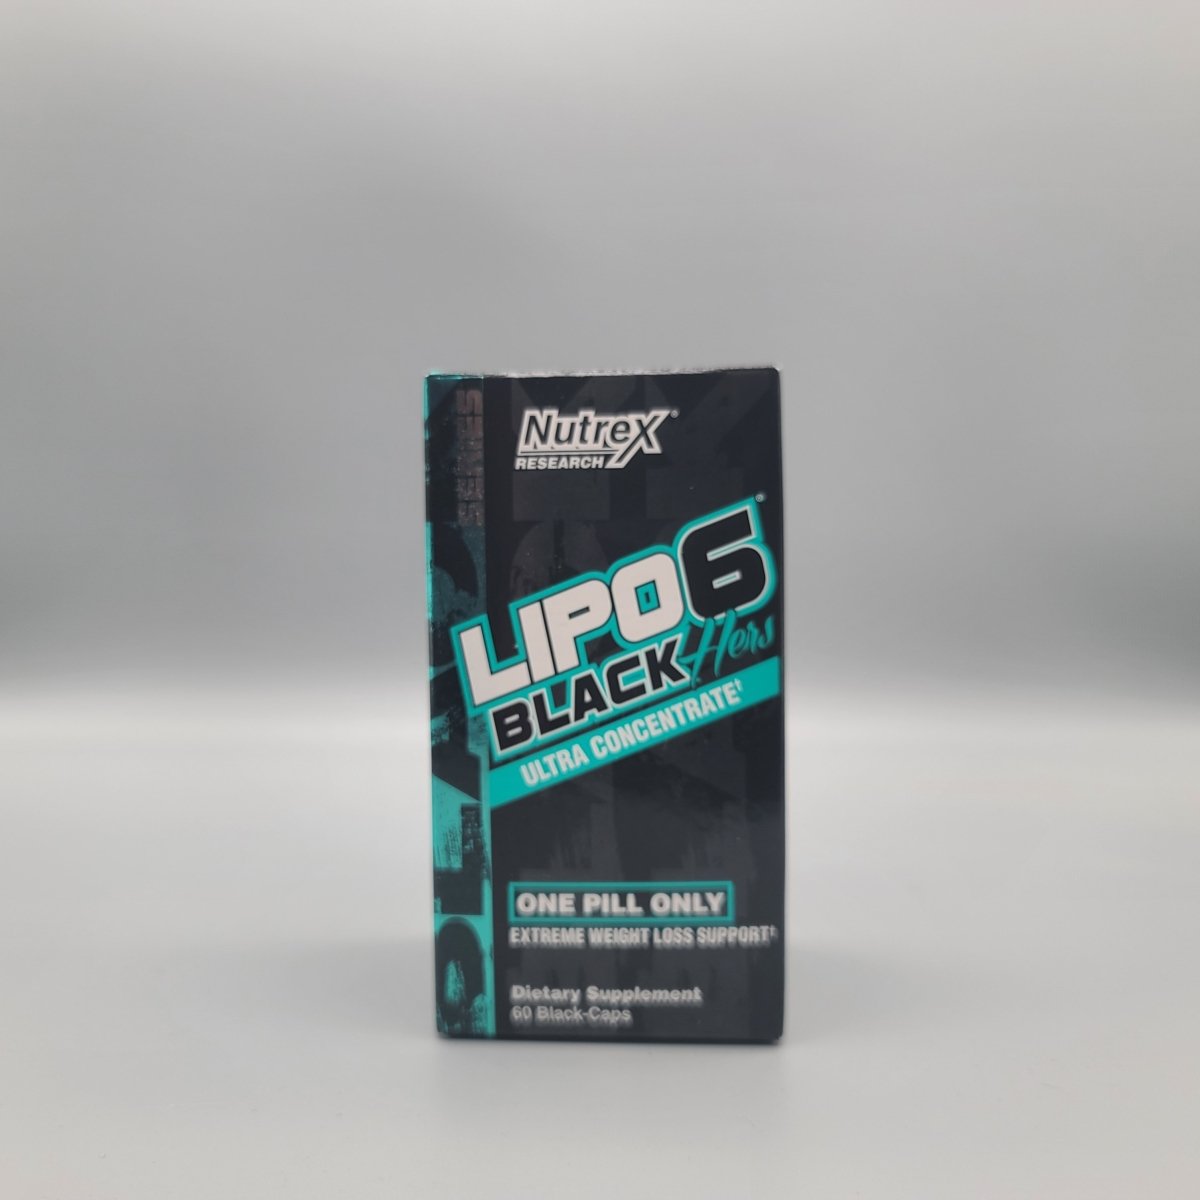 Lipo 6 - Black Hers - Ultra Concentrate - Extreme Weight Loss Support - 60 Black Capsules